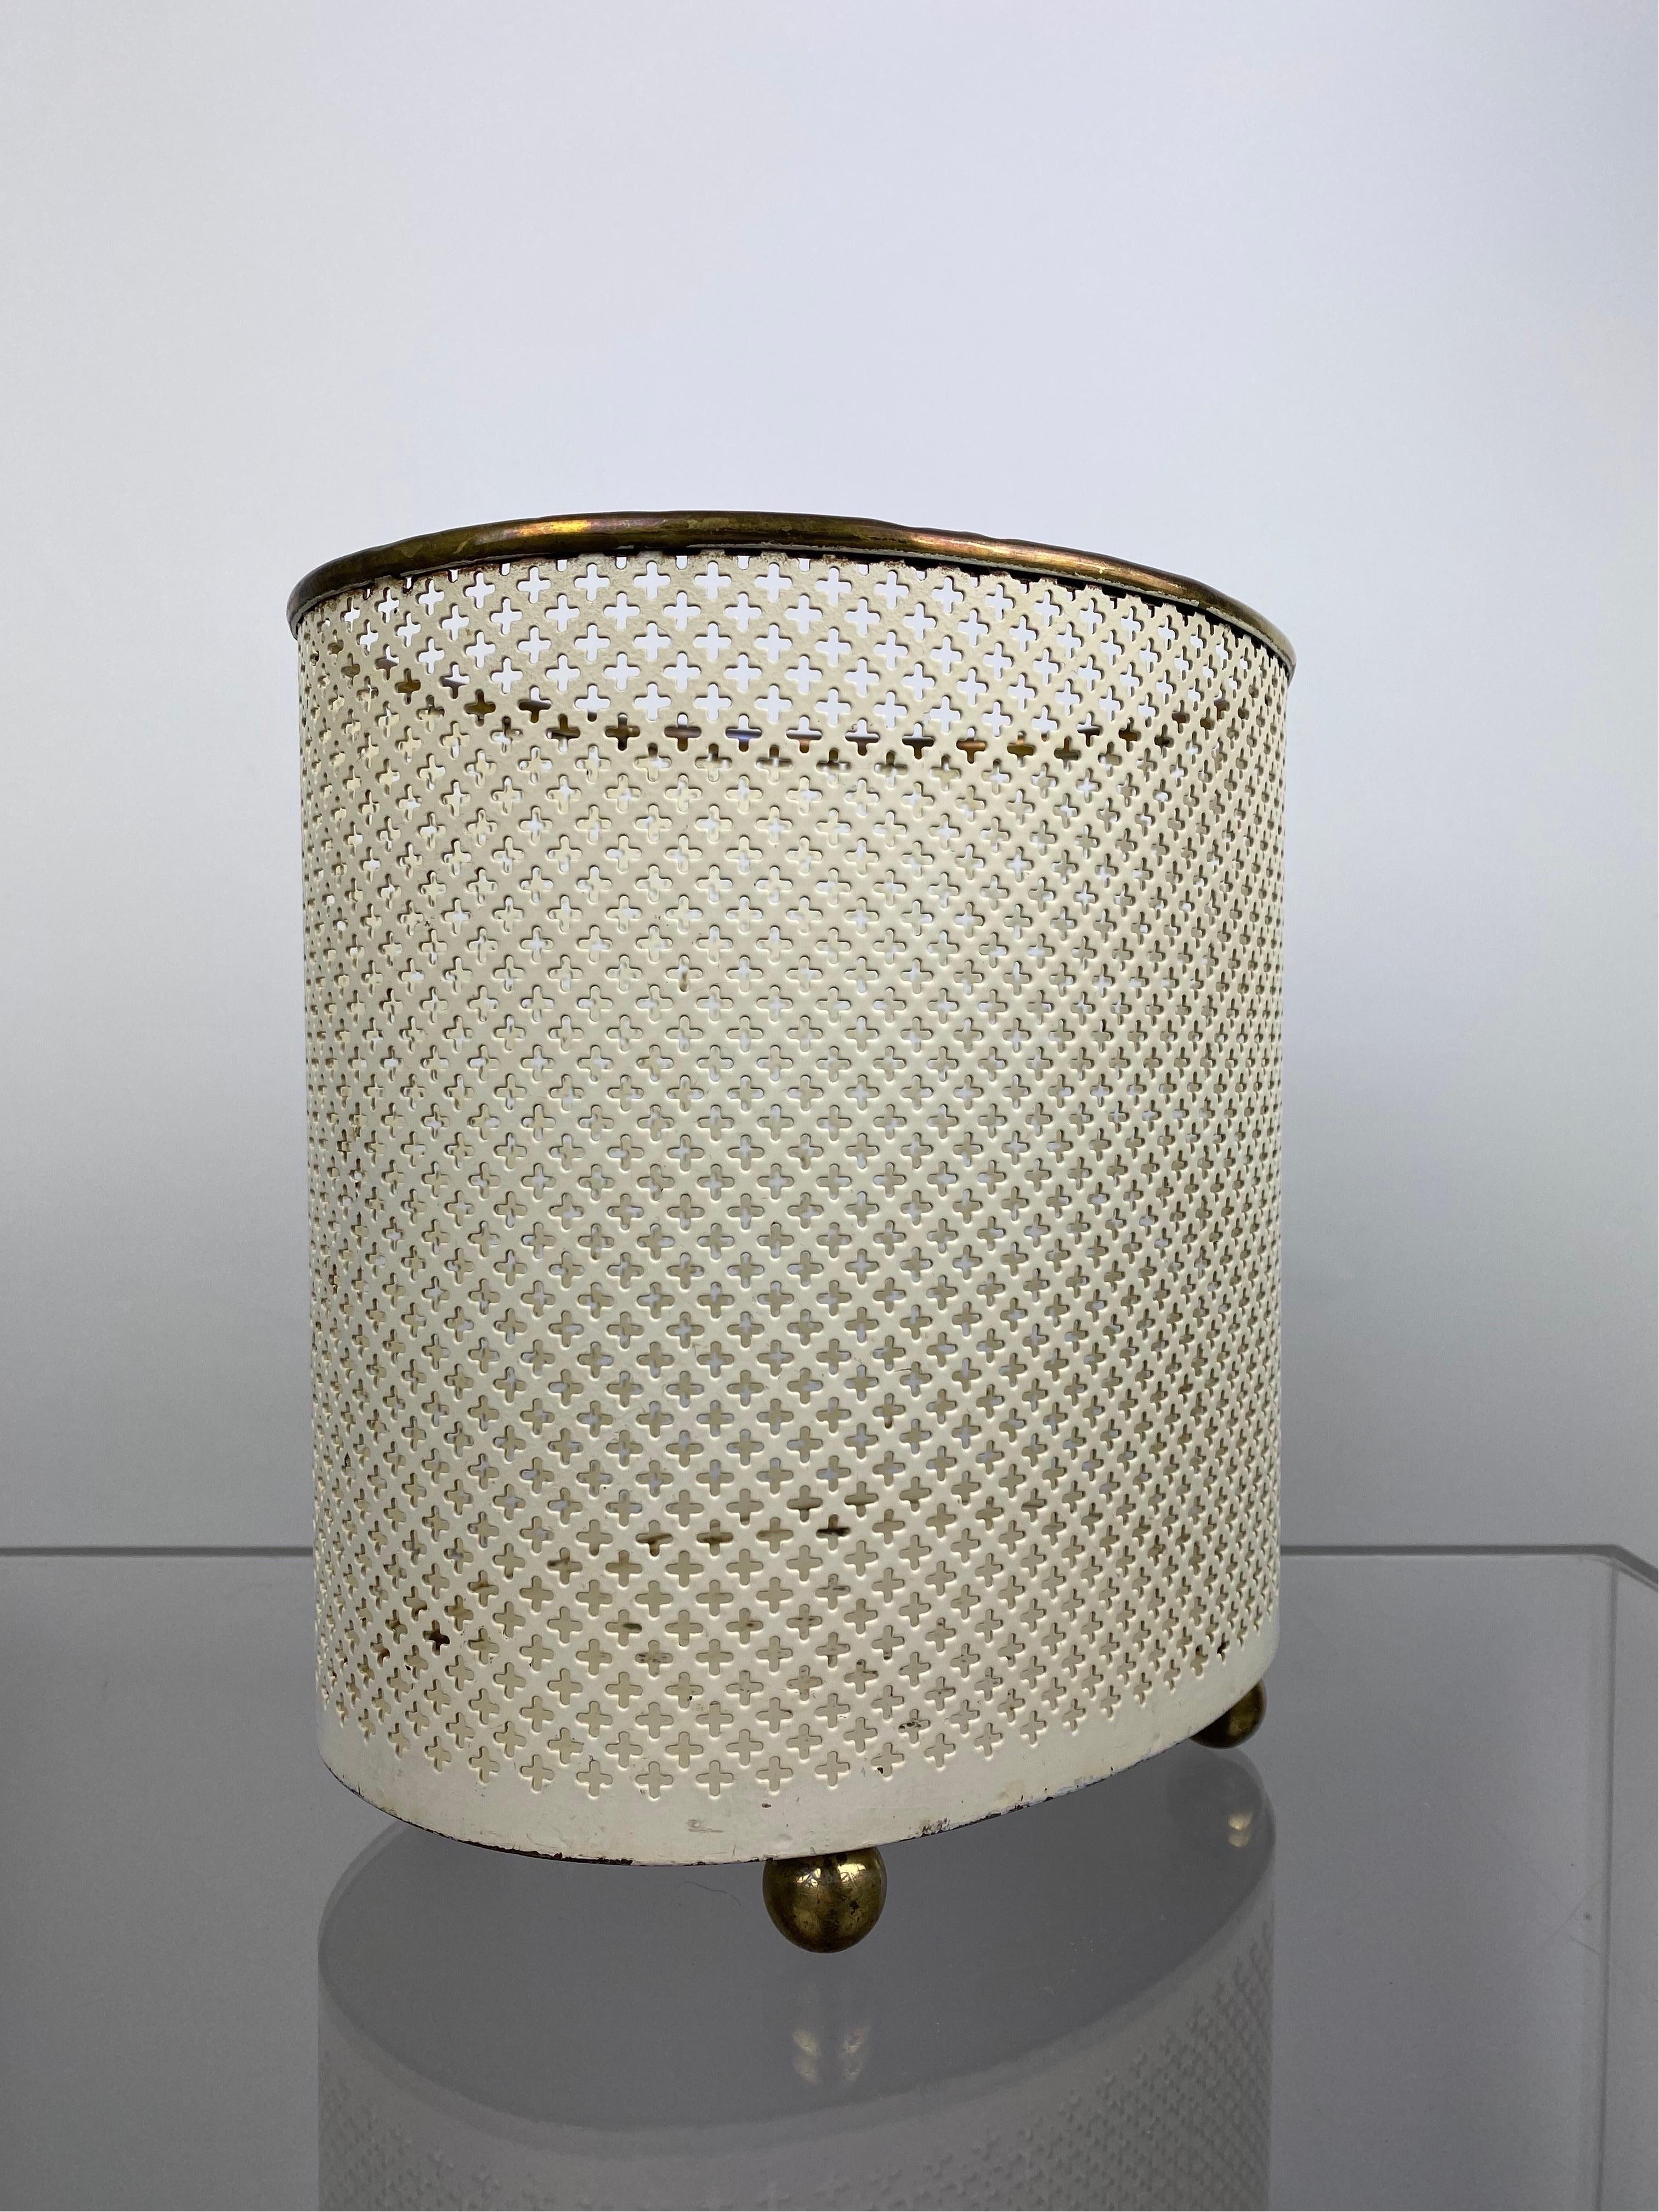 Beautiful small Paper Waste Bin or maybe Jardiniere made by Vereinigte Werkstätten München around 1950.
With nice solid Brass Sphere feet details and the rare Cross-hole-metal Structure this Basket is a high quality Product of the Vereinigte